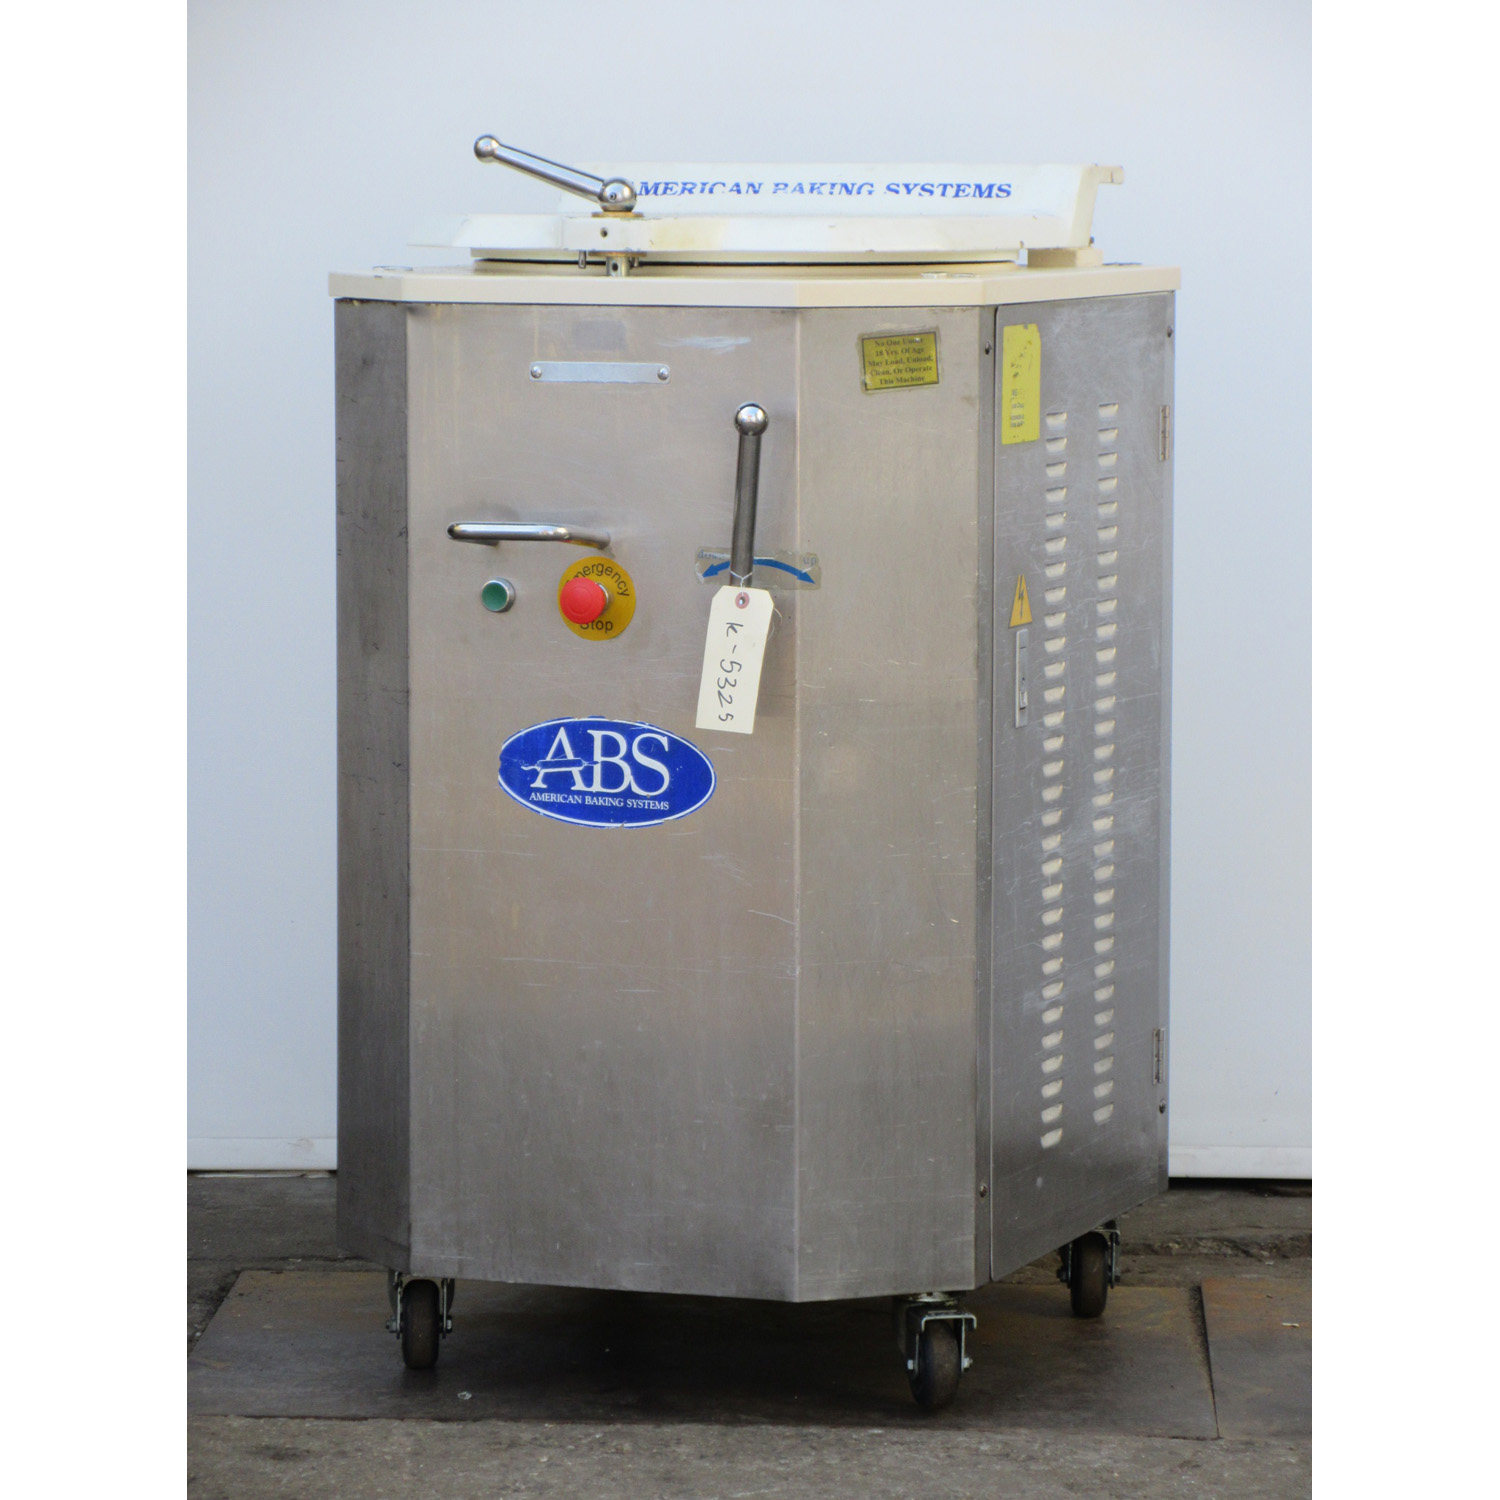 ABS ABSHDD20 Hydraulic 20 Portion Dough Divider, Used Excellent Condition image 2